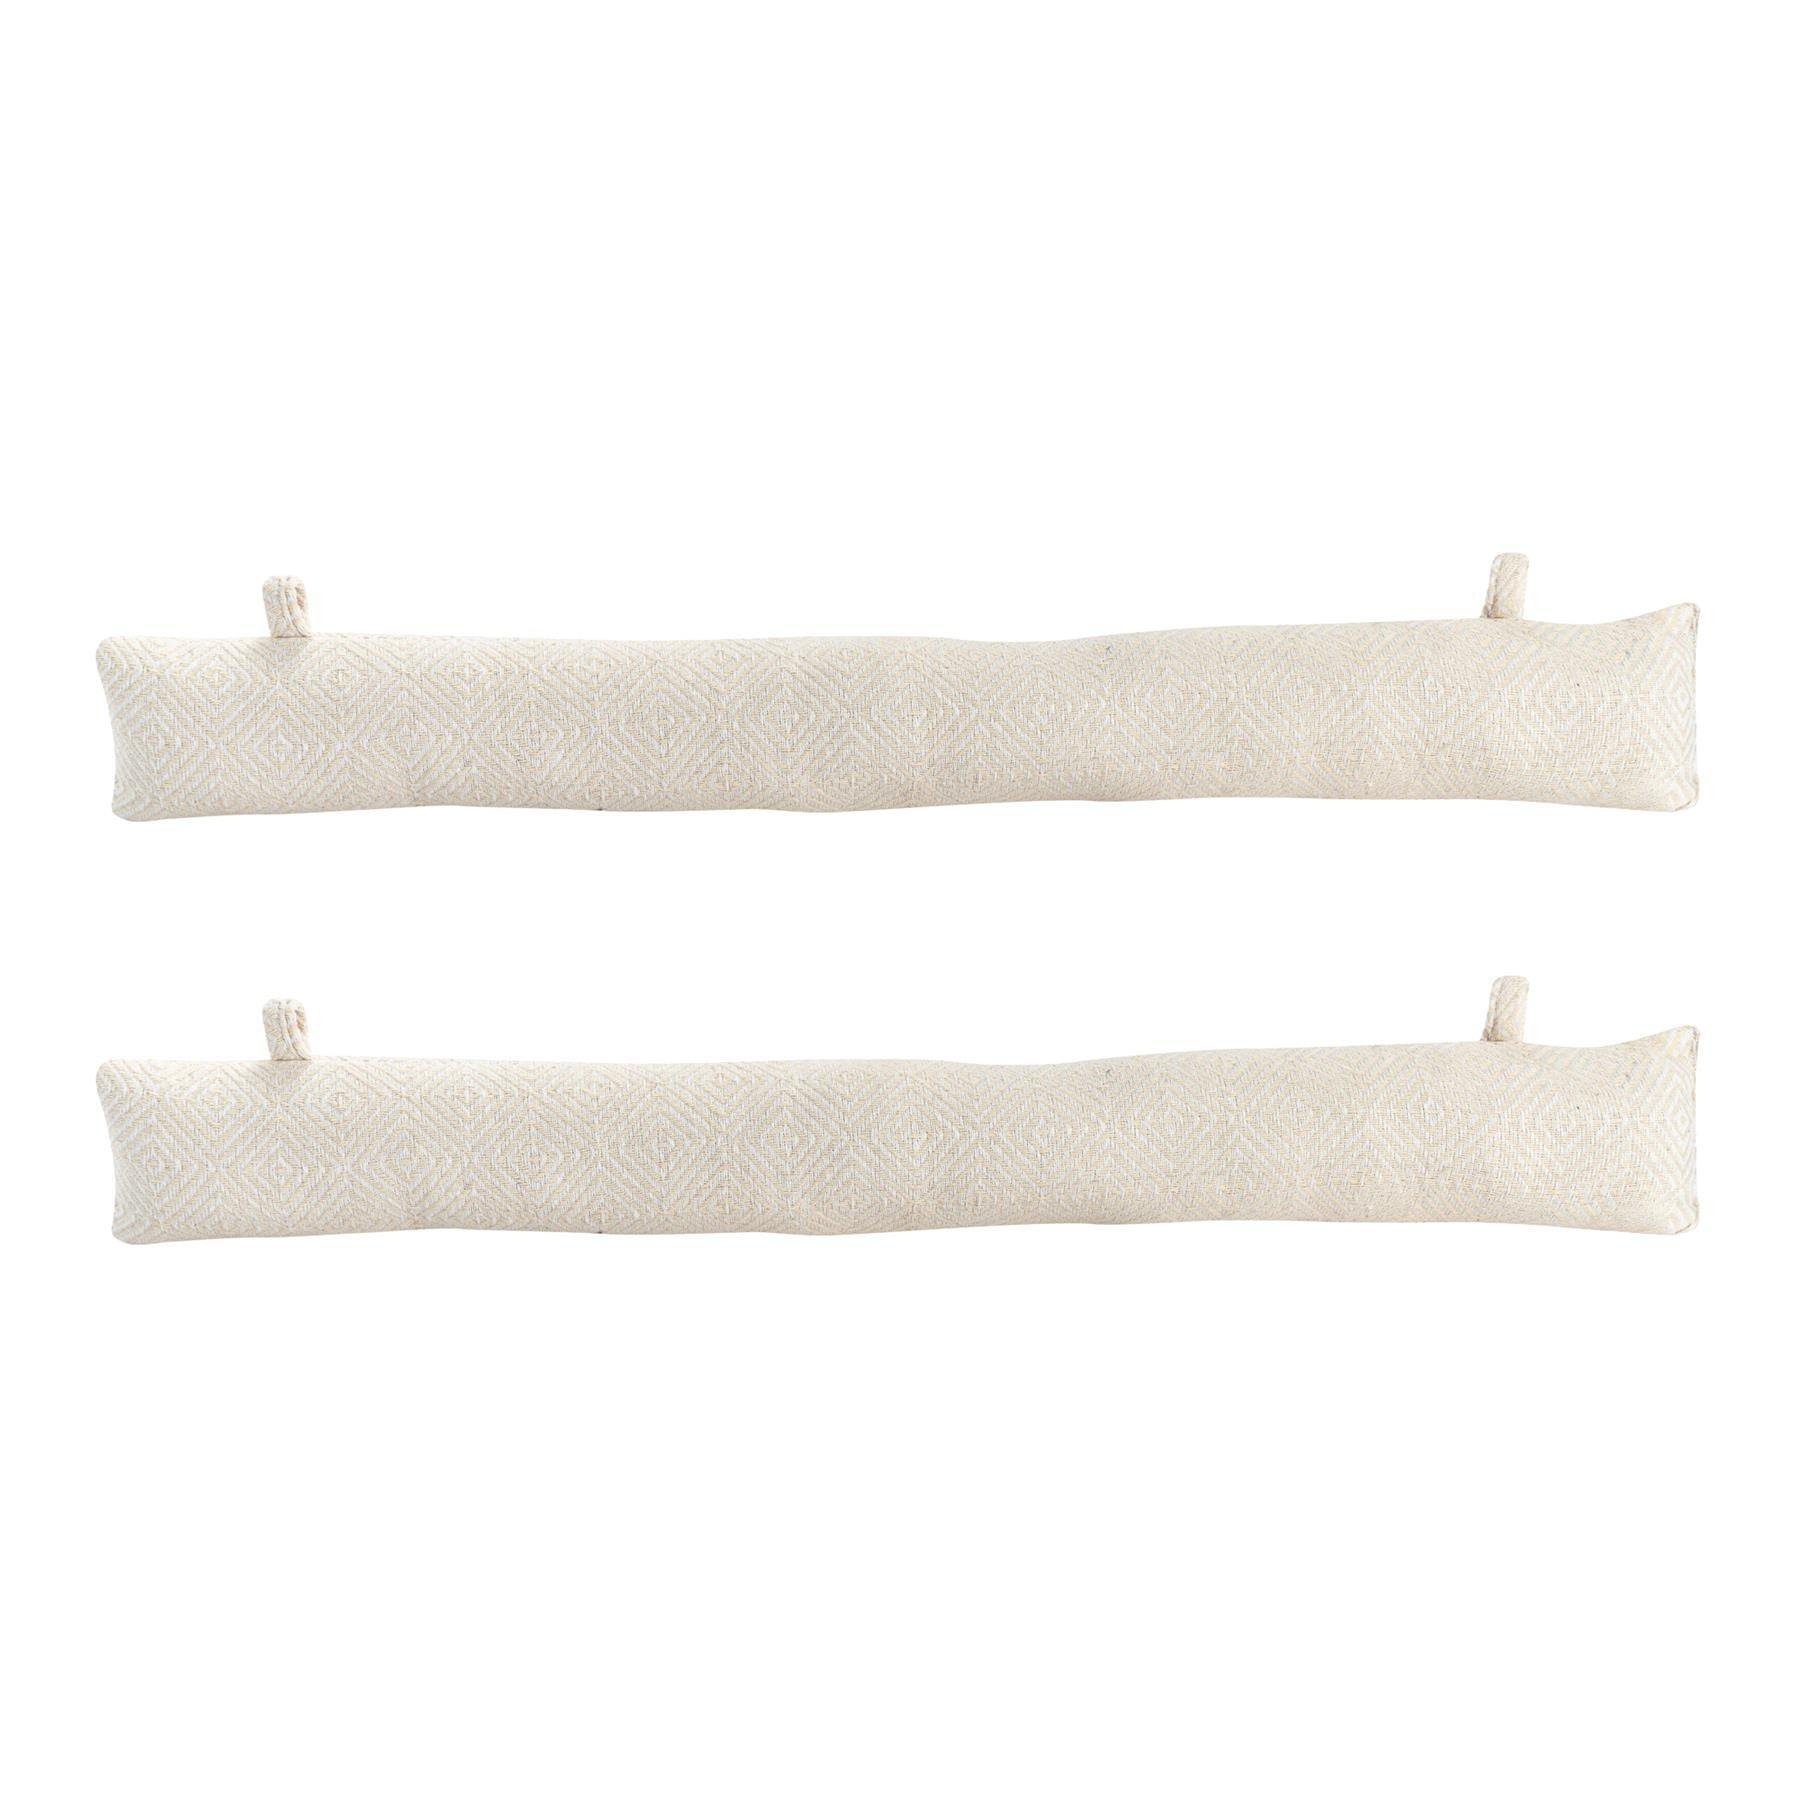 Chevron Draught Excluders 80cm Pack of 2 - image 1